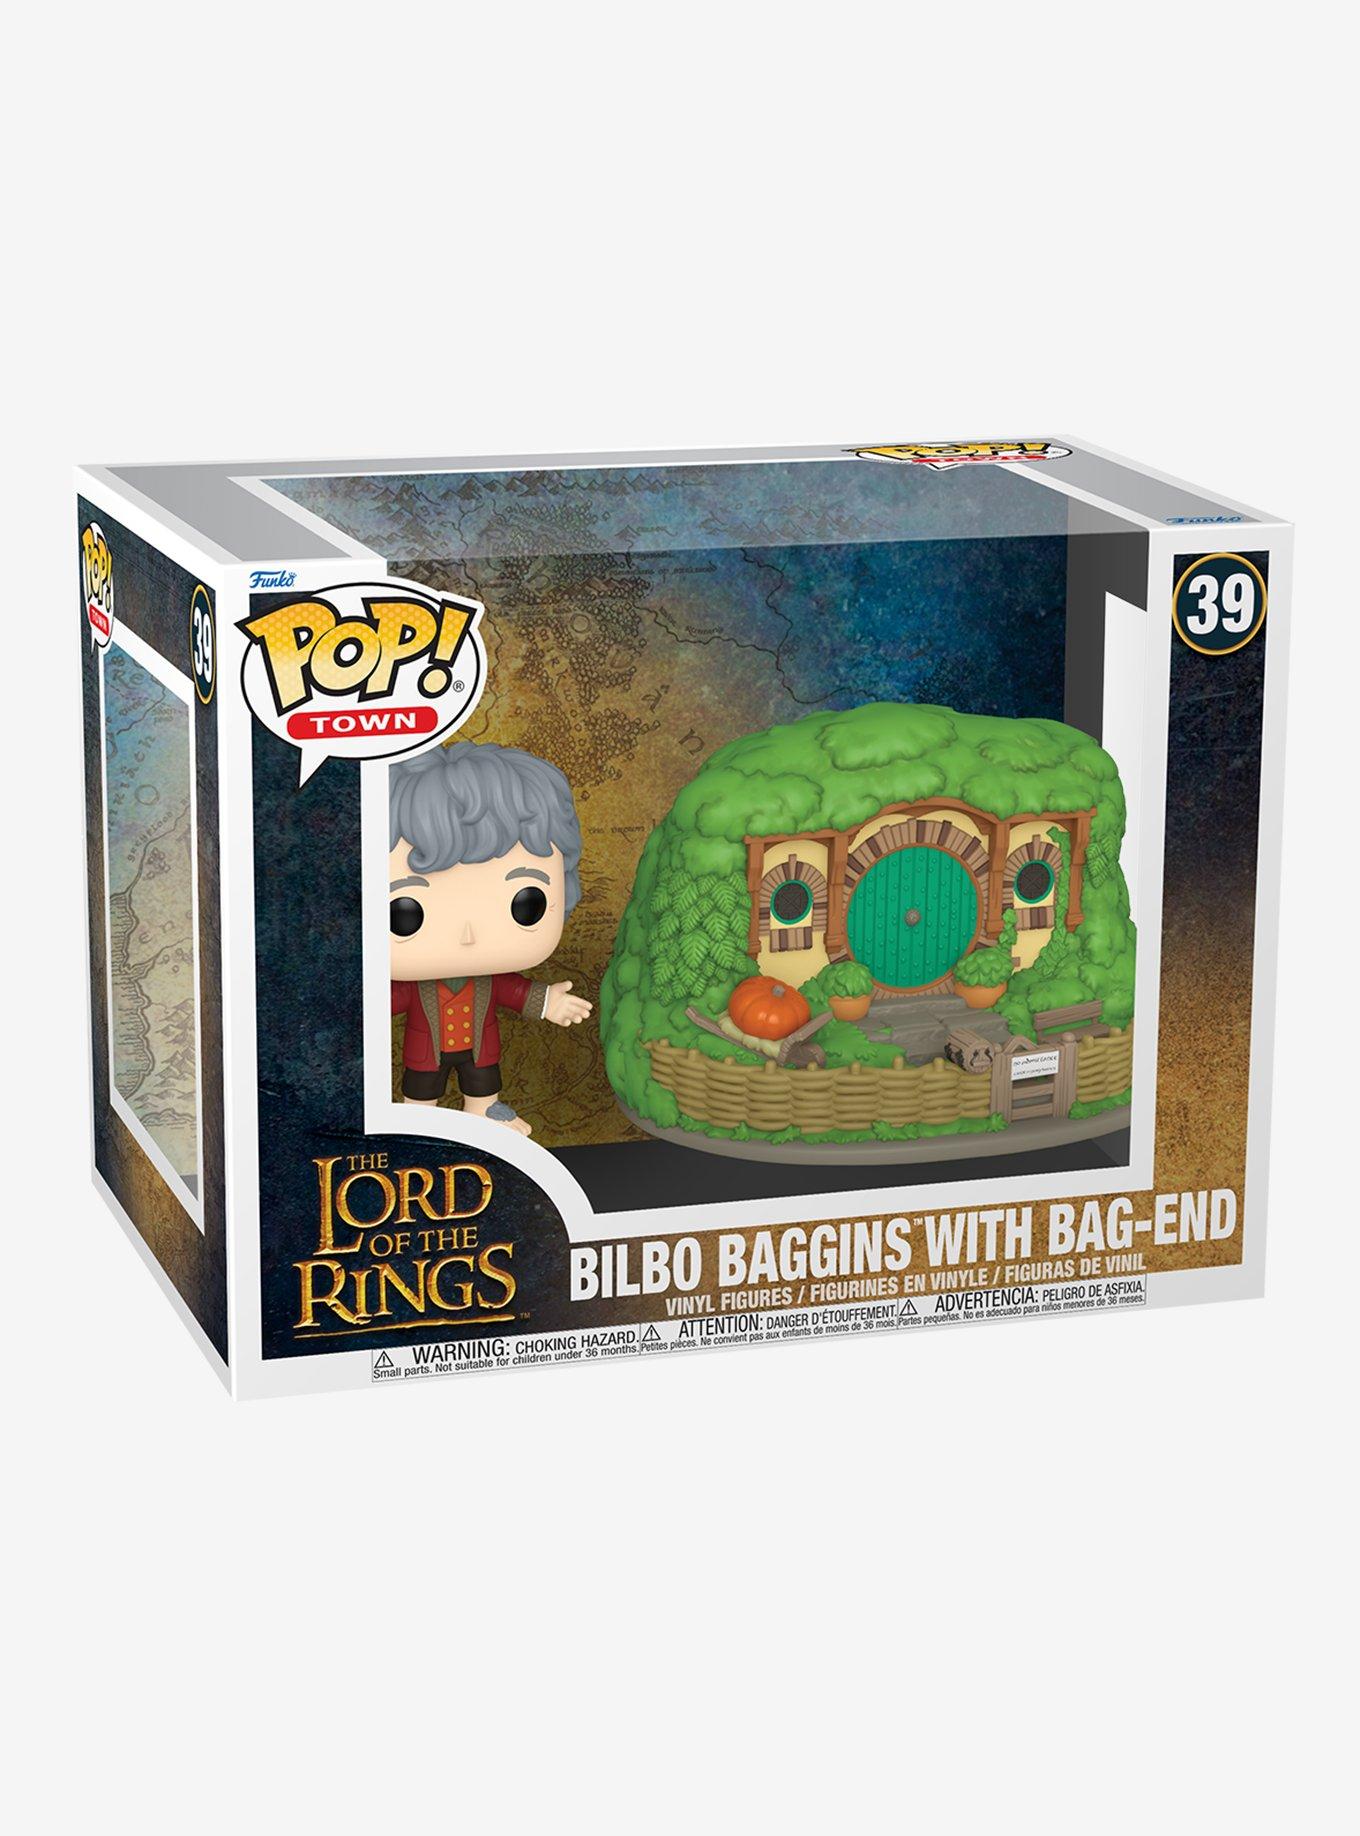 Funko Pop! Town The Lord of the Rings Bilbo Baggins with Bag-End Vinyl Figure, , alternate